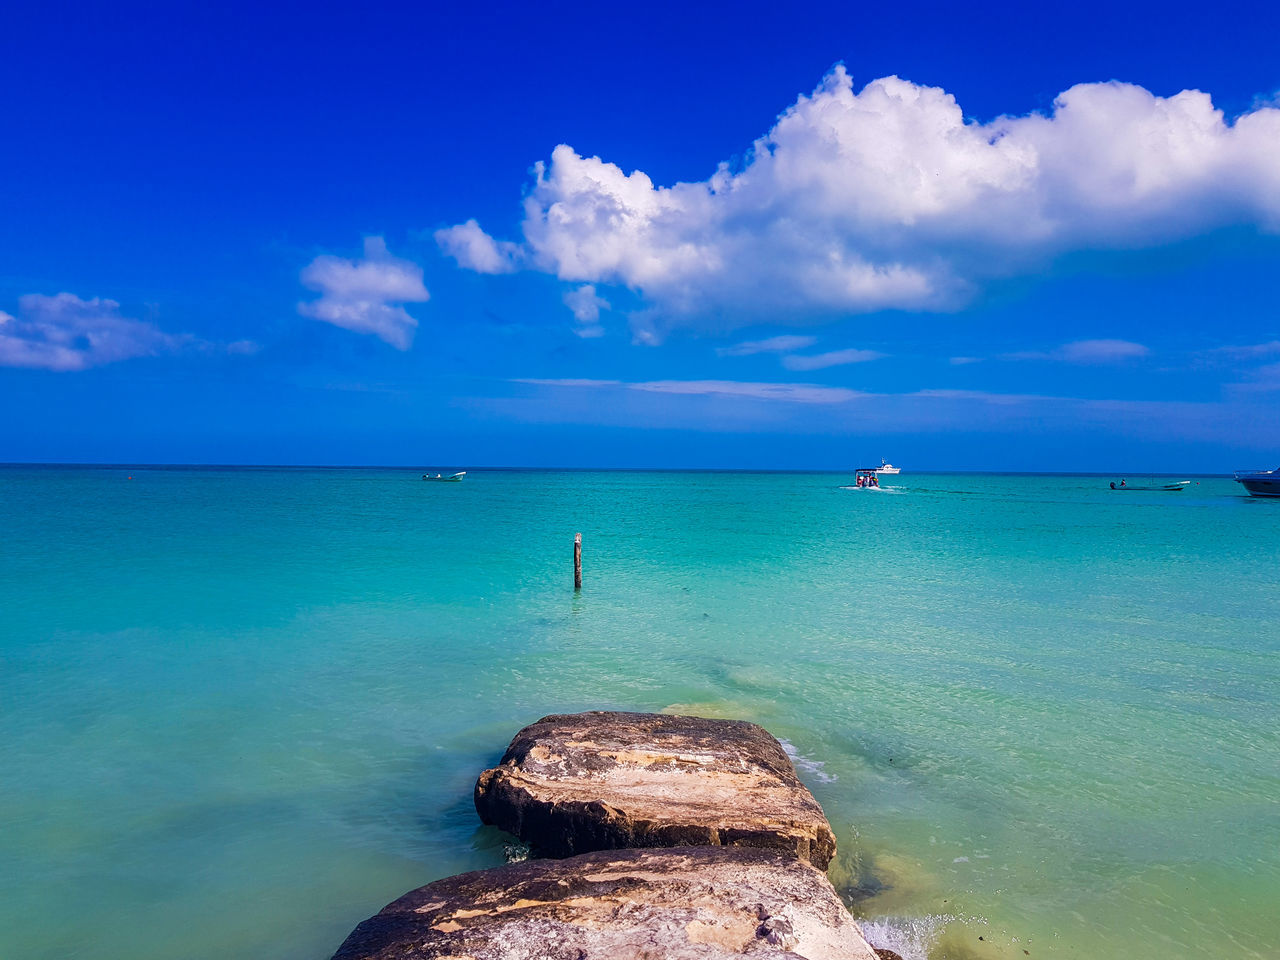 sea, water, sky, scenics - nature, beauty in nature, horizon over water, horizon, cloud - sky, blue, tranquil scene, tranquility, rock, nature, solid, rock - object, idyllic, day, land, no people, outdoors, turquoise colored